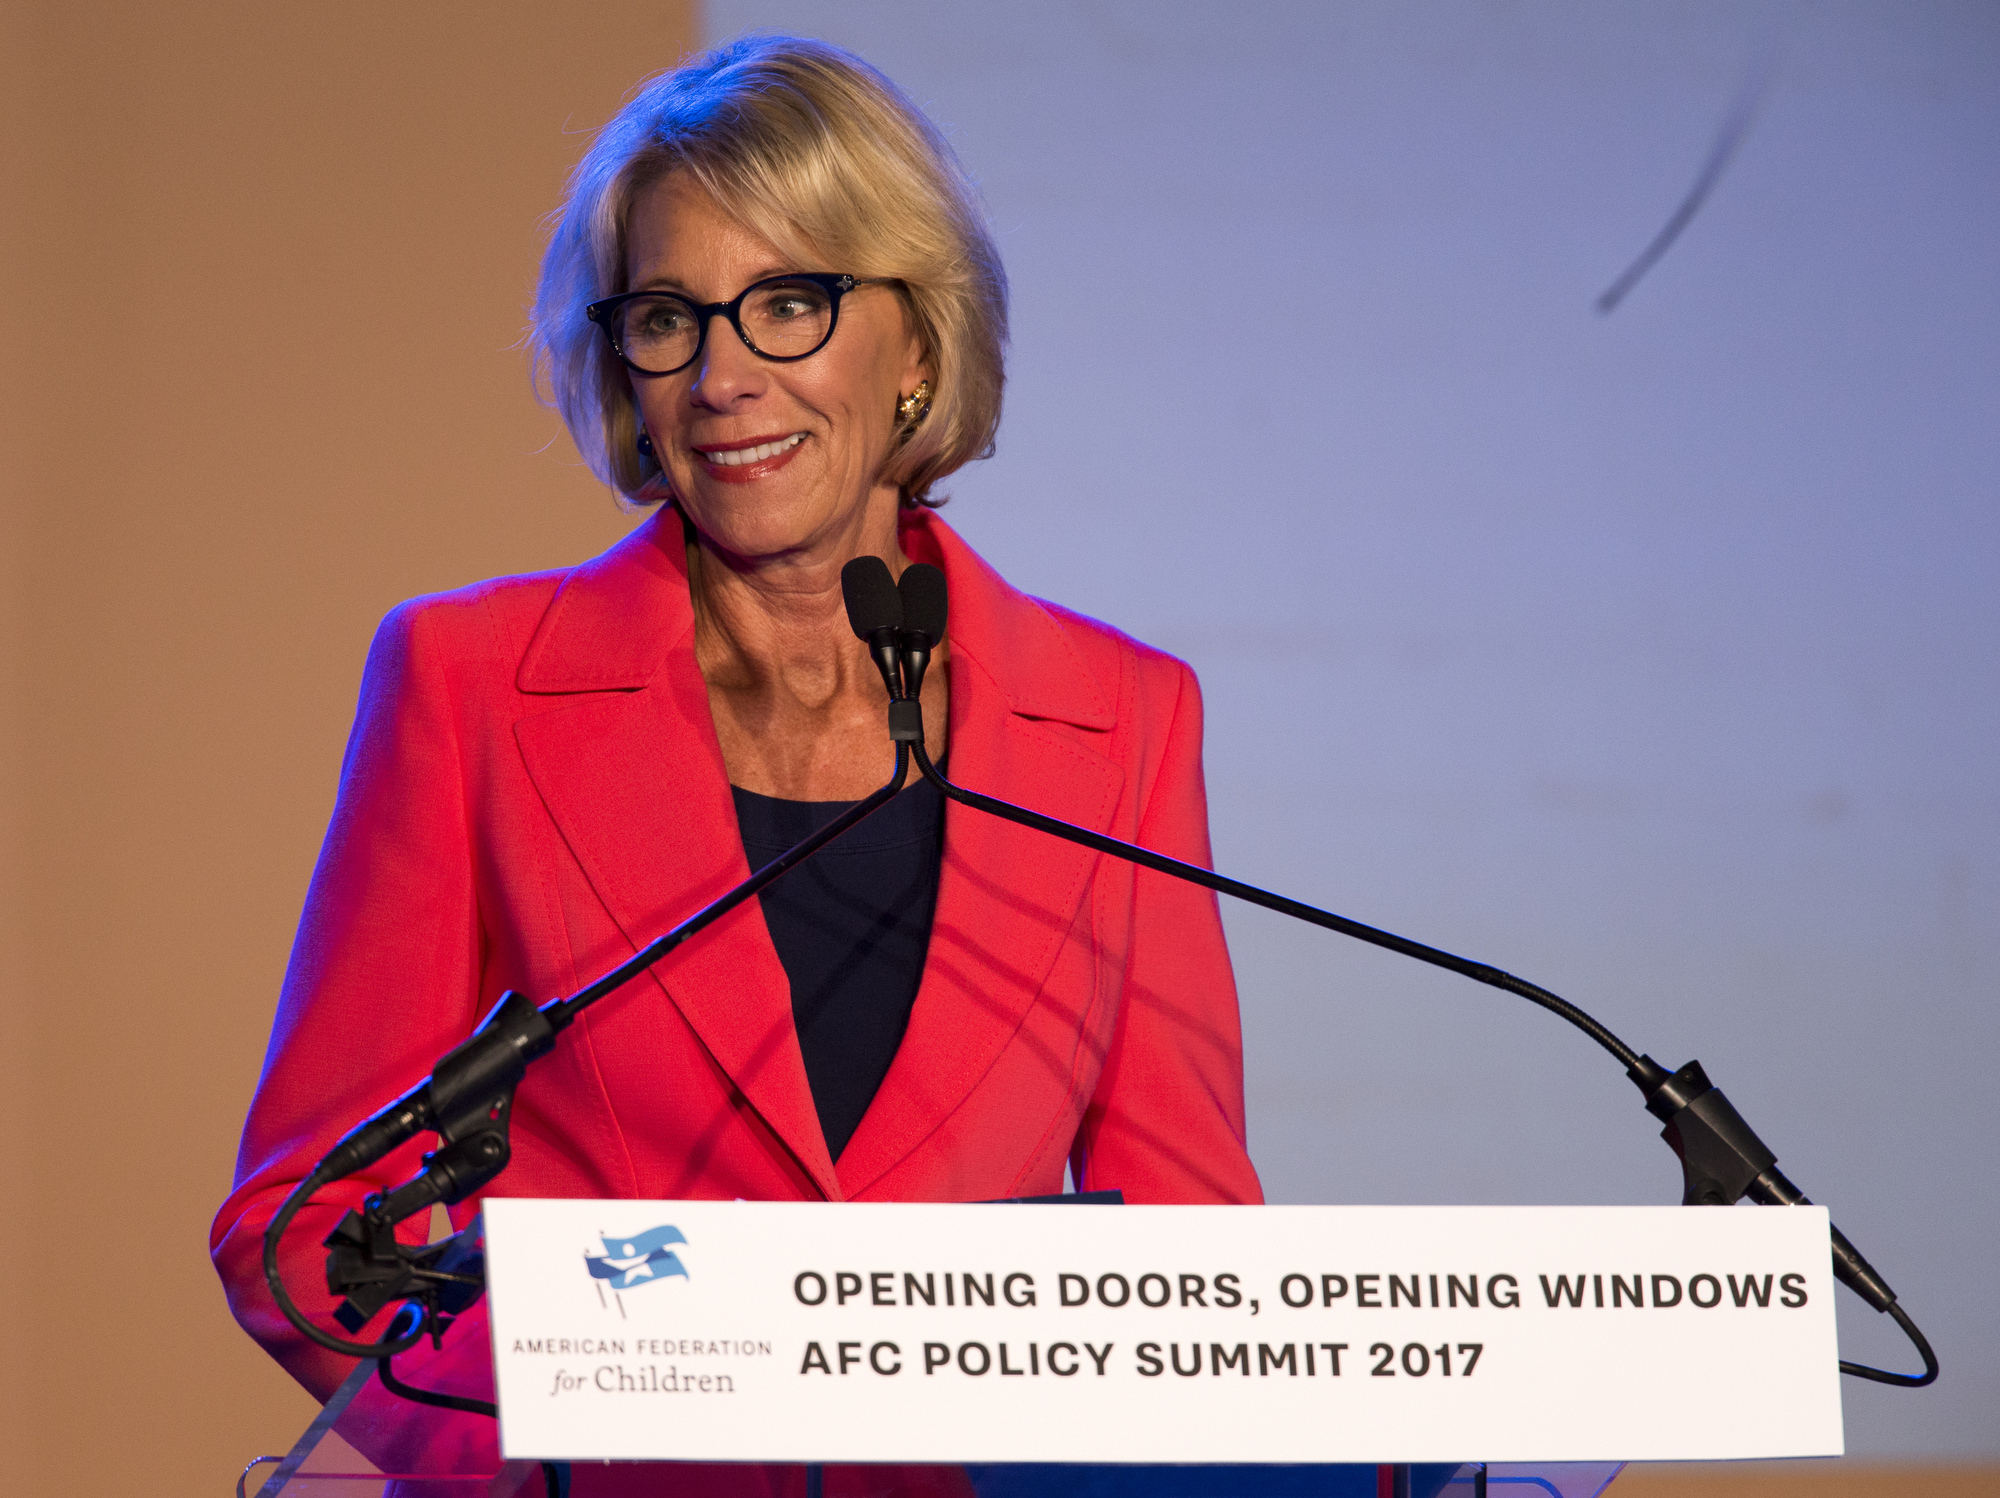 Betsy DeVos speaks at the rightwing "American Federation for Children" May 22 in Indiana.